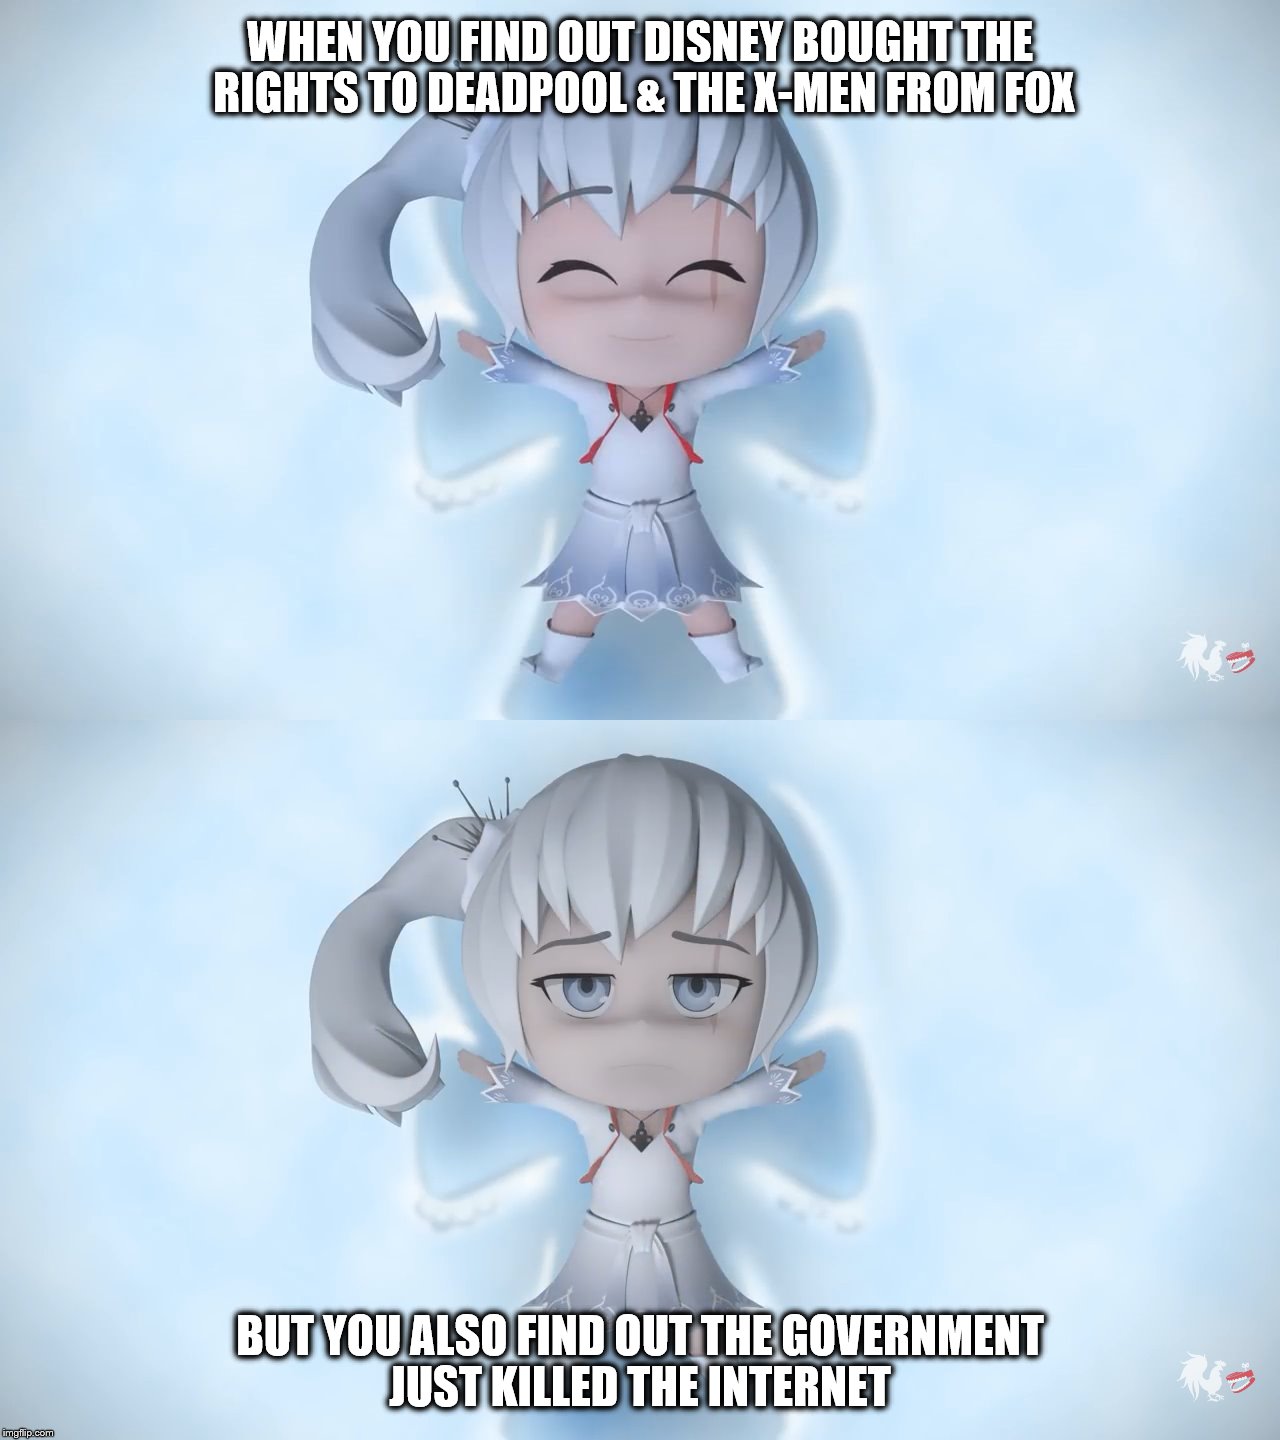 RWBY Chibi Meme | WHEN YOU FIND OUT DISNEY BOUGHT THE RIGHTS TO DEADPOOL & THE X-MEN FROM FOX; BUT YOU ALSO FIND OUT THE GOVERNMENT JUST KILLED THE INTERNET | image tagged in weiss,rwby chibi | made w/ Imgflip meme maker